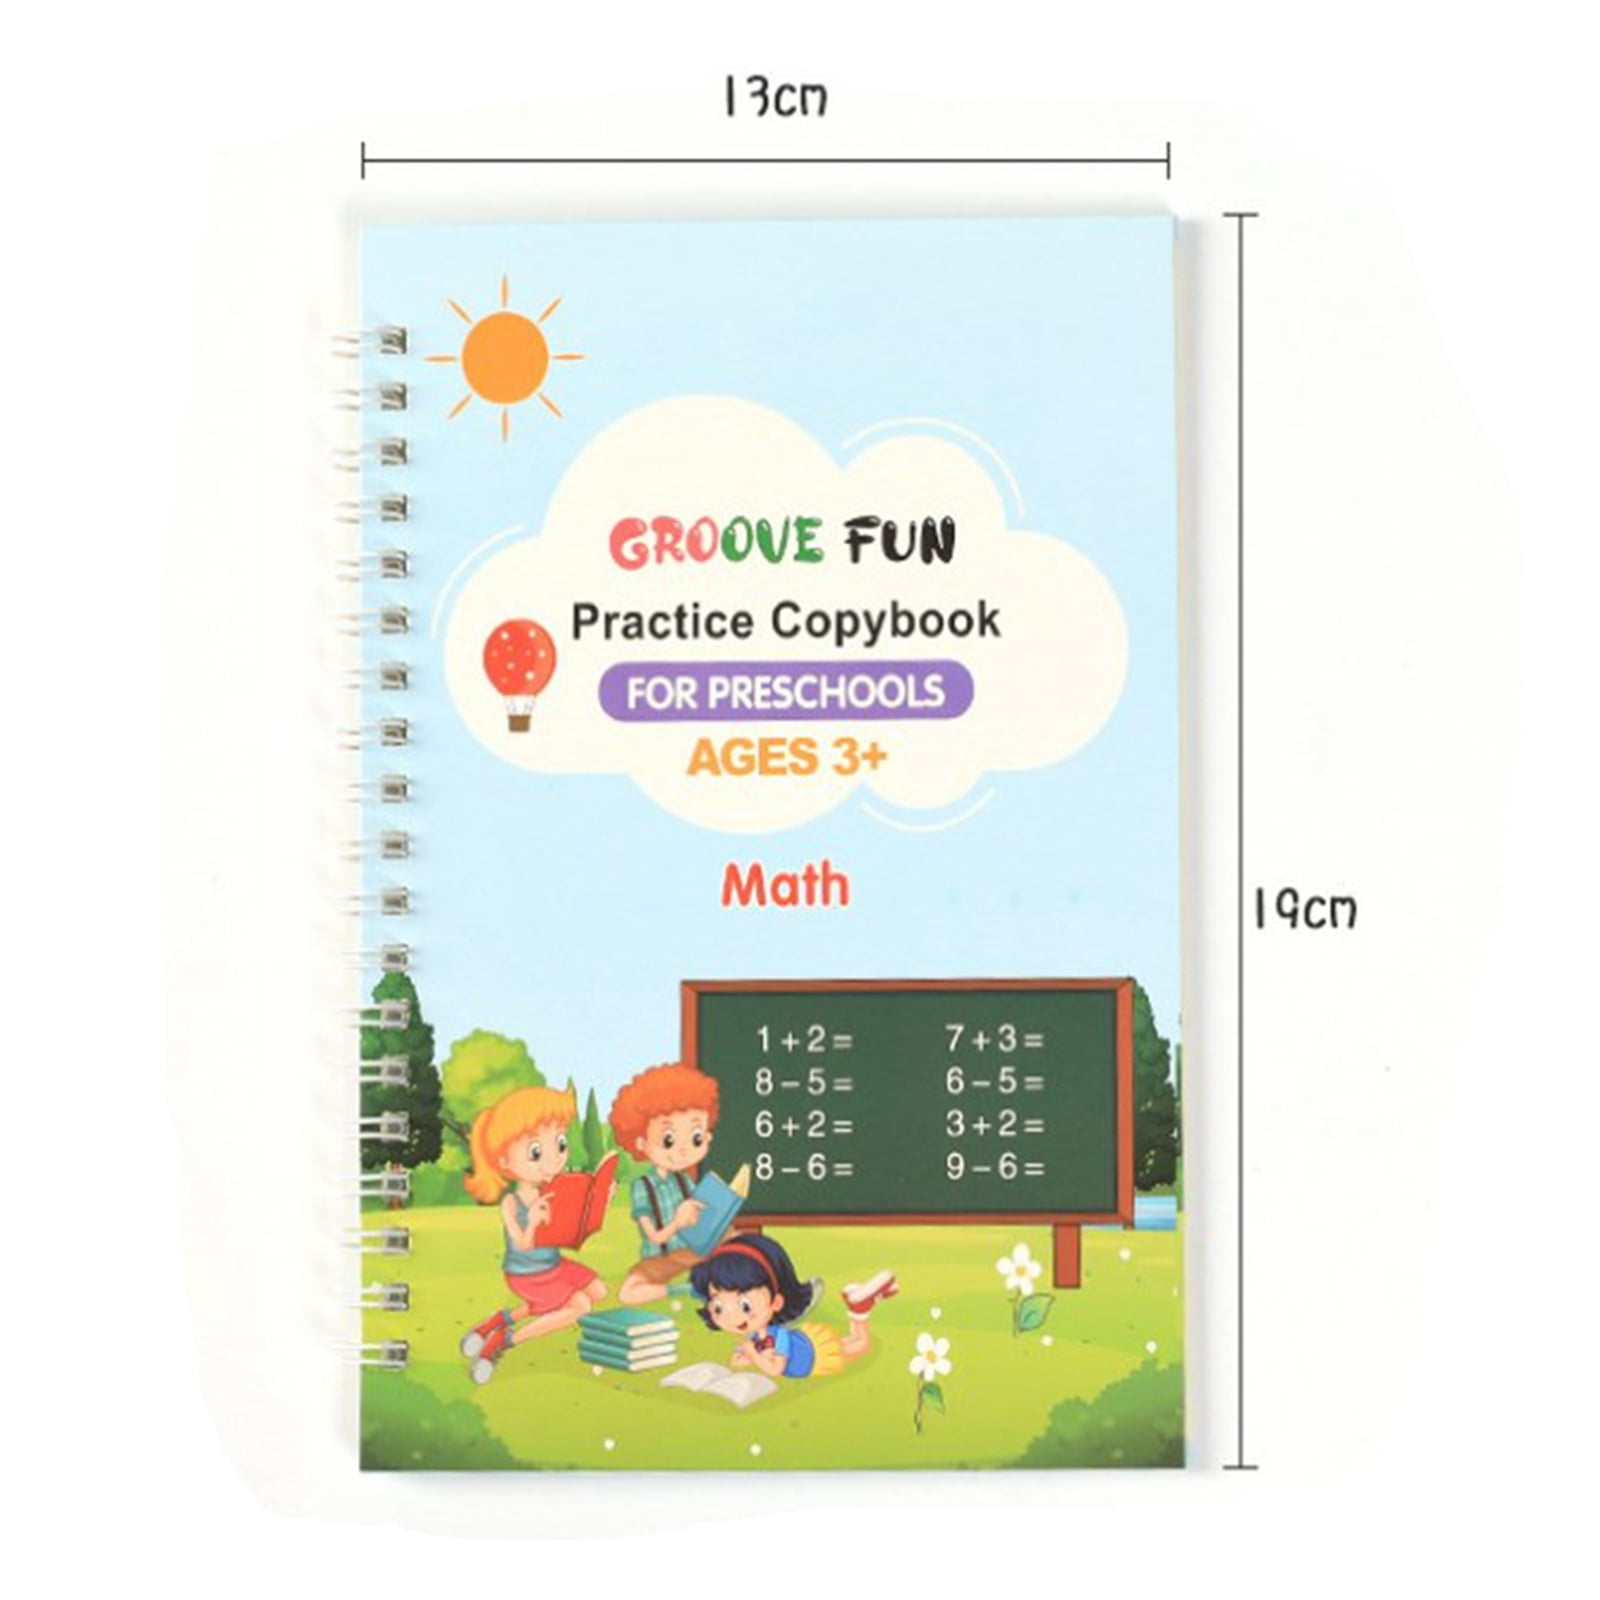  POVY Magic Copybook for kids Grooves Reusable